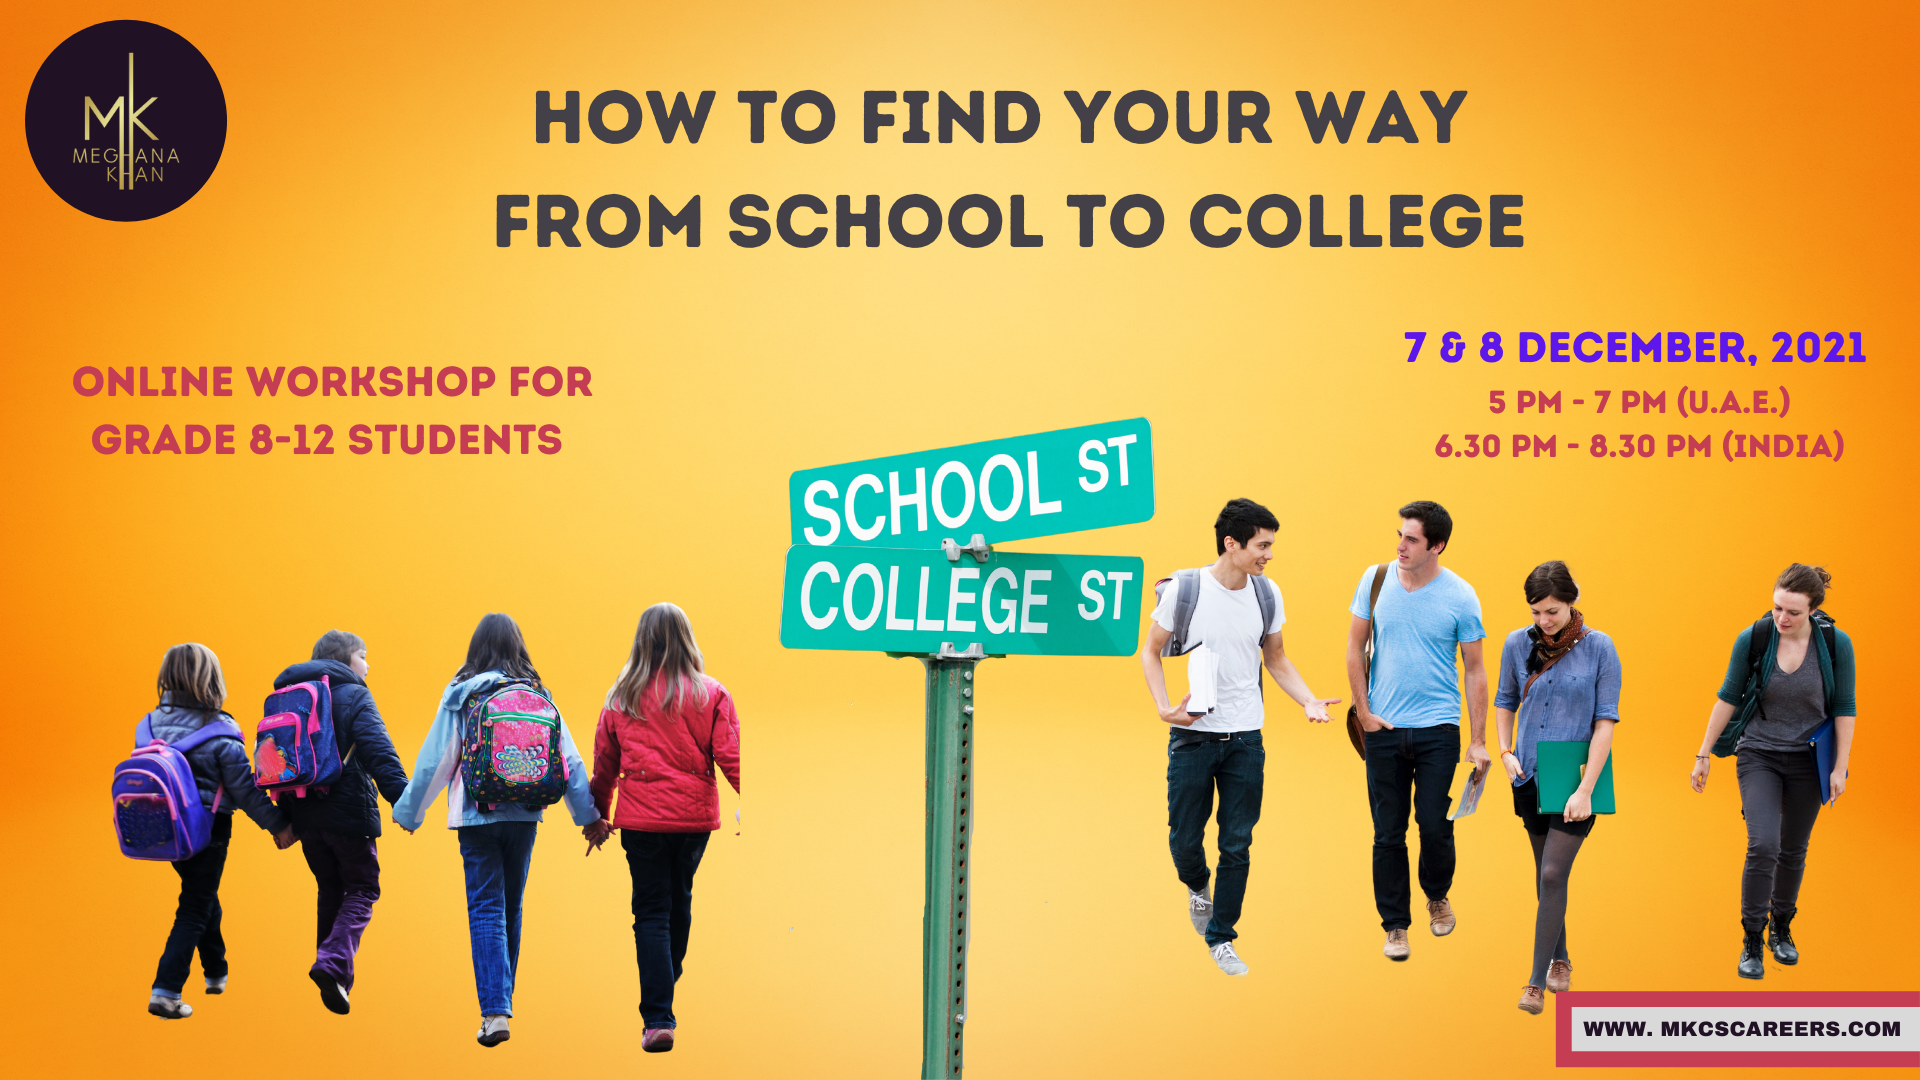 How To Find Your Way From School To College